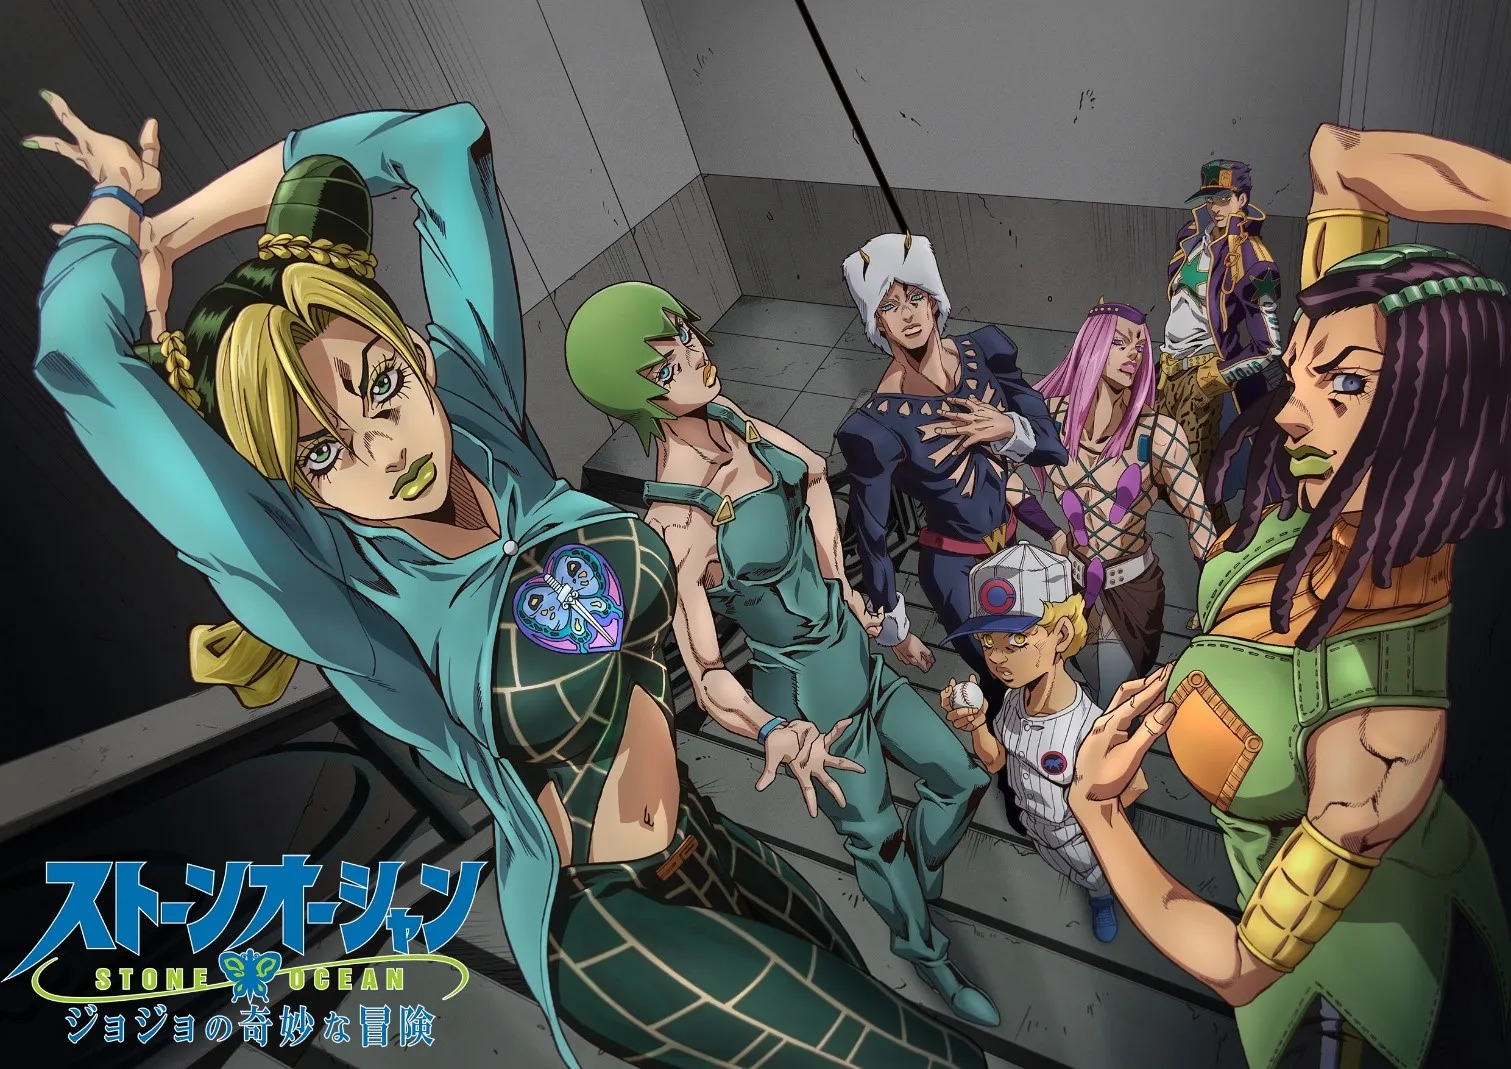 The cast of JoJo’s Bizarre Adventure: Stone Ocean. A group of women and men in elaborate, multicolored costumes posing on a staircase.